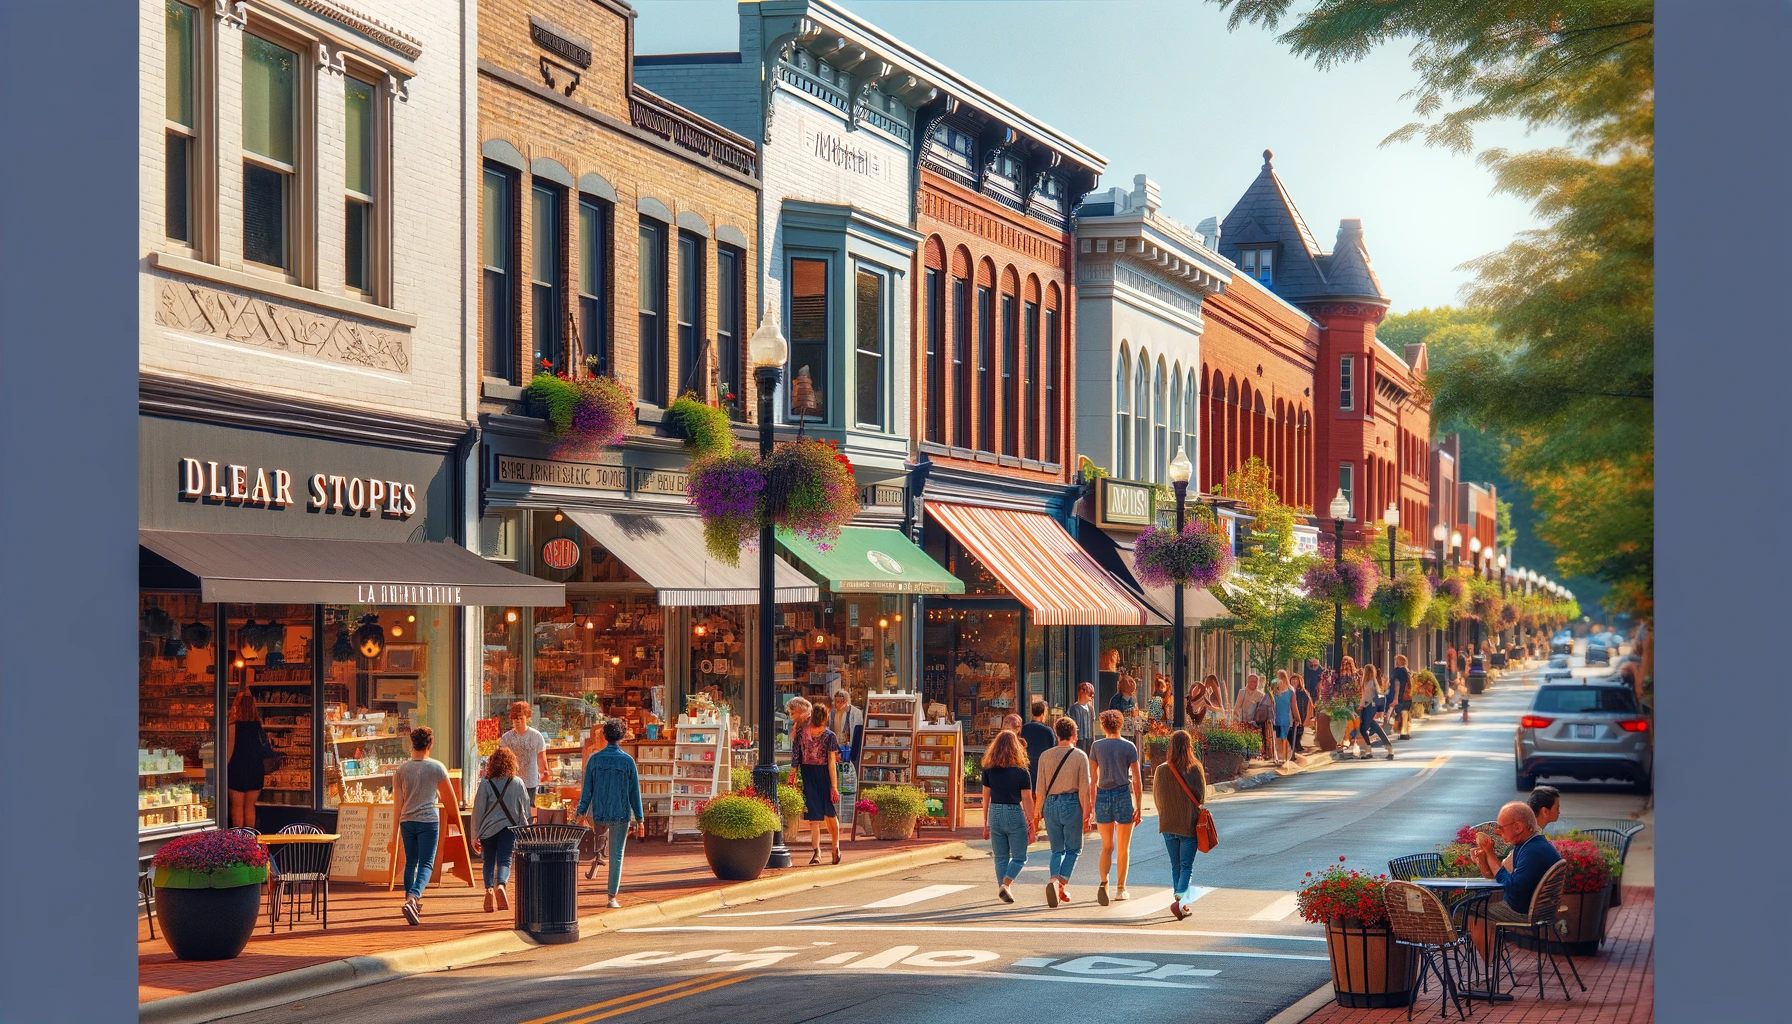 A typical American Main Street scene, bustling with activity. The street is lined with a variety of small businesses including a bakery, and a bookstore